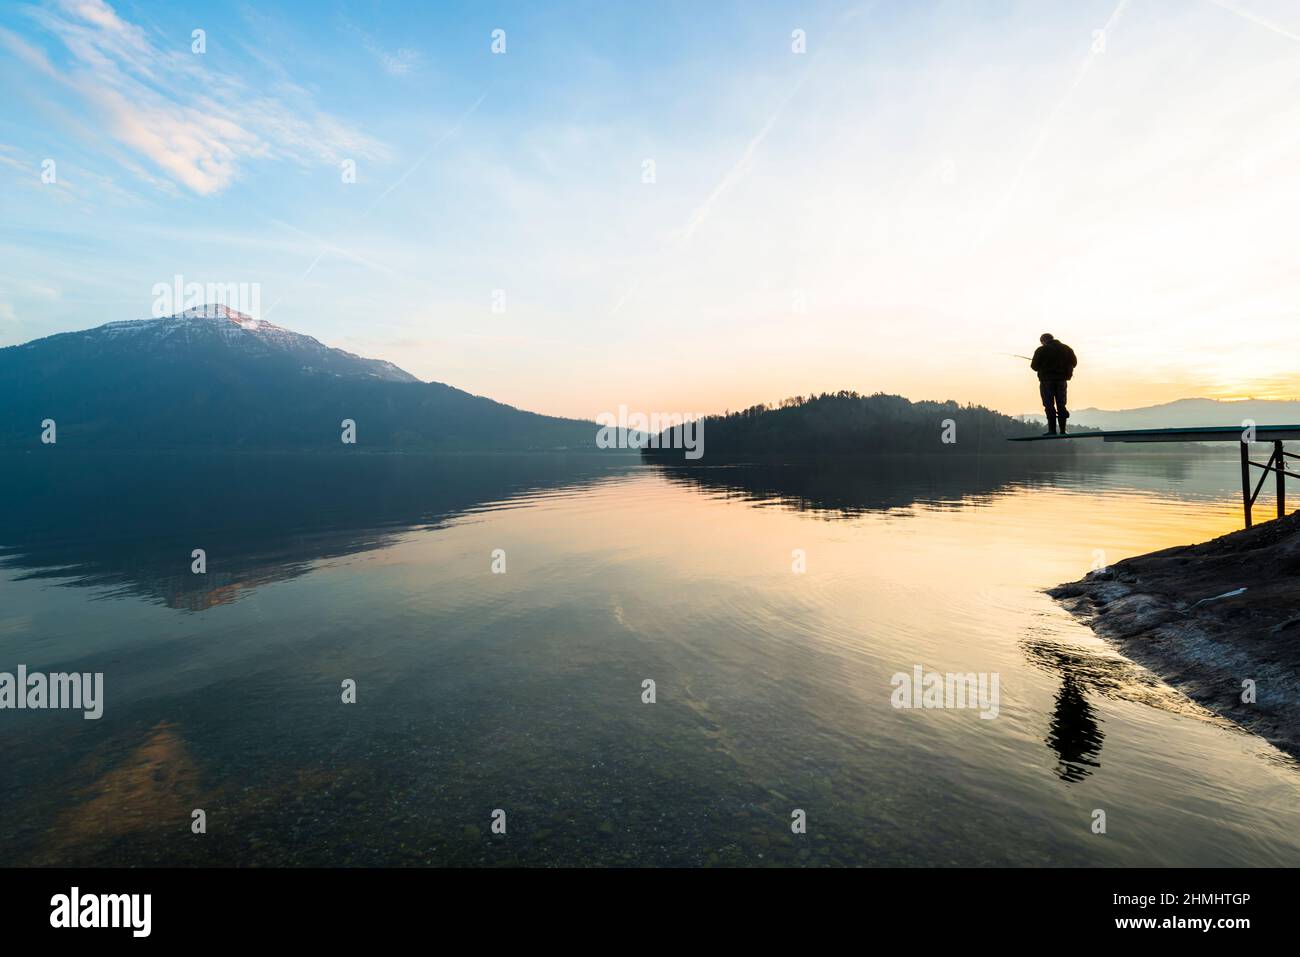 A man catches a fish. Happy relaxed hours alone with nature. Landscape of a mountain lake. Evening light of the setting sun. Male silhouette with a fi Stock Photo